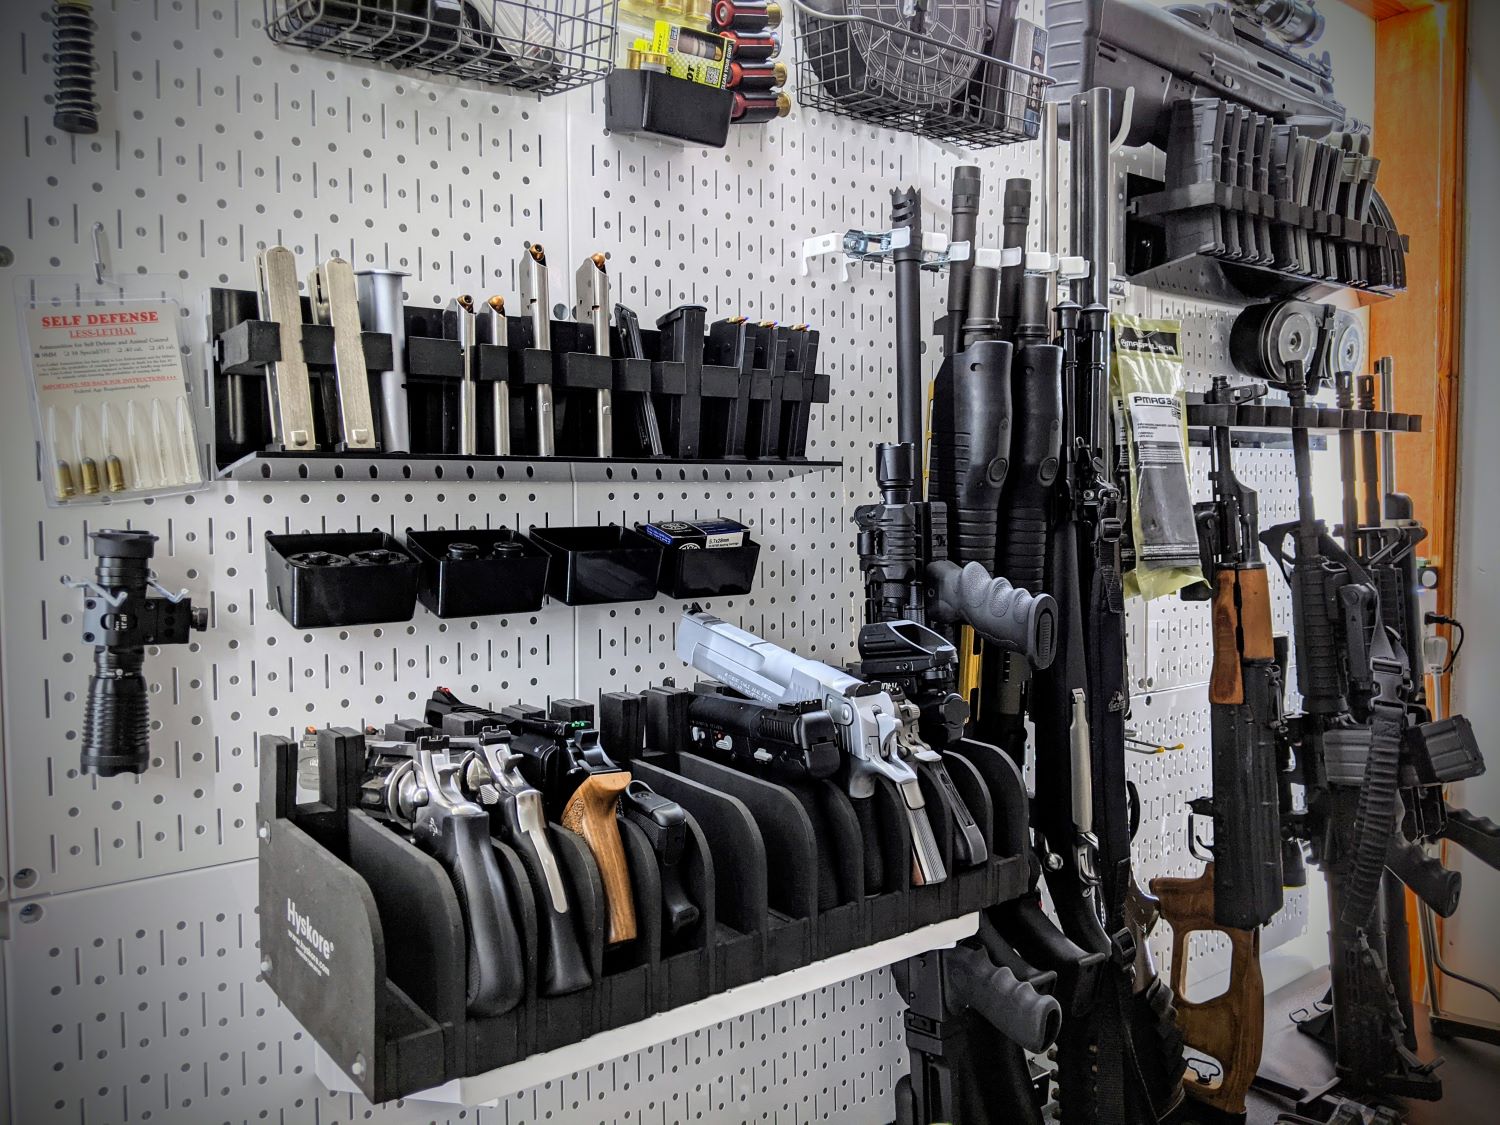 Different kinds of firearms in a gun rack